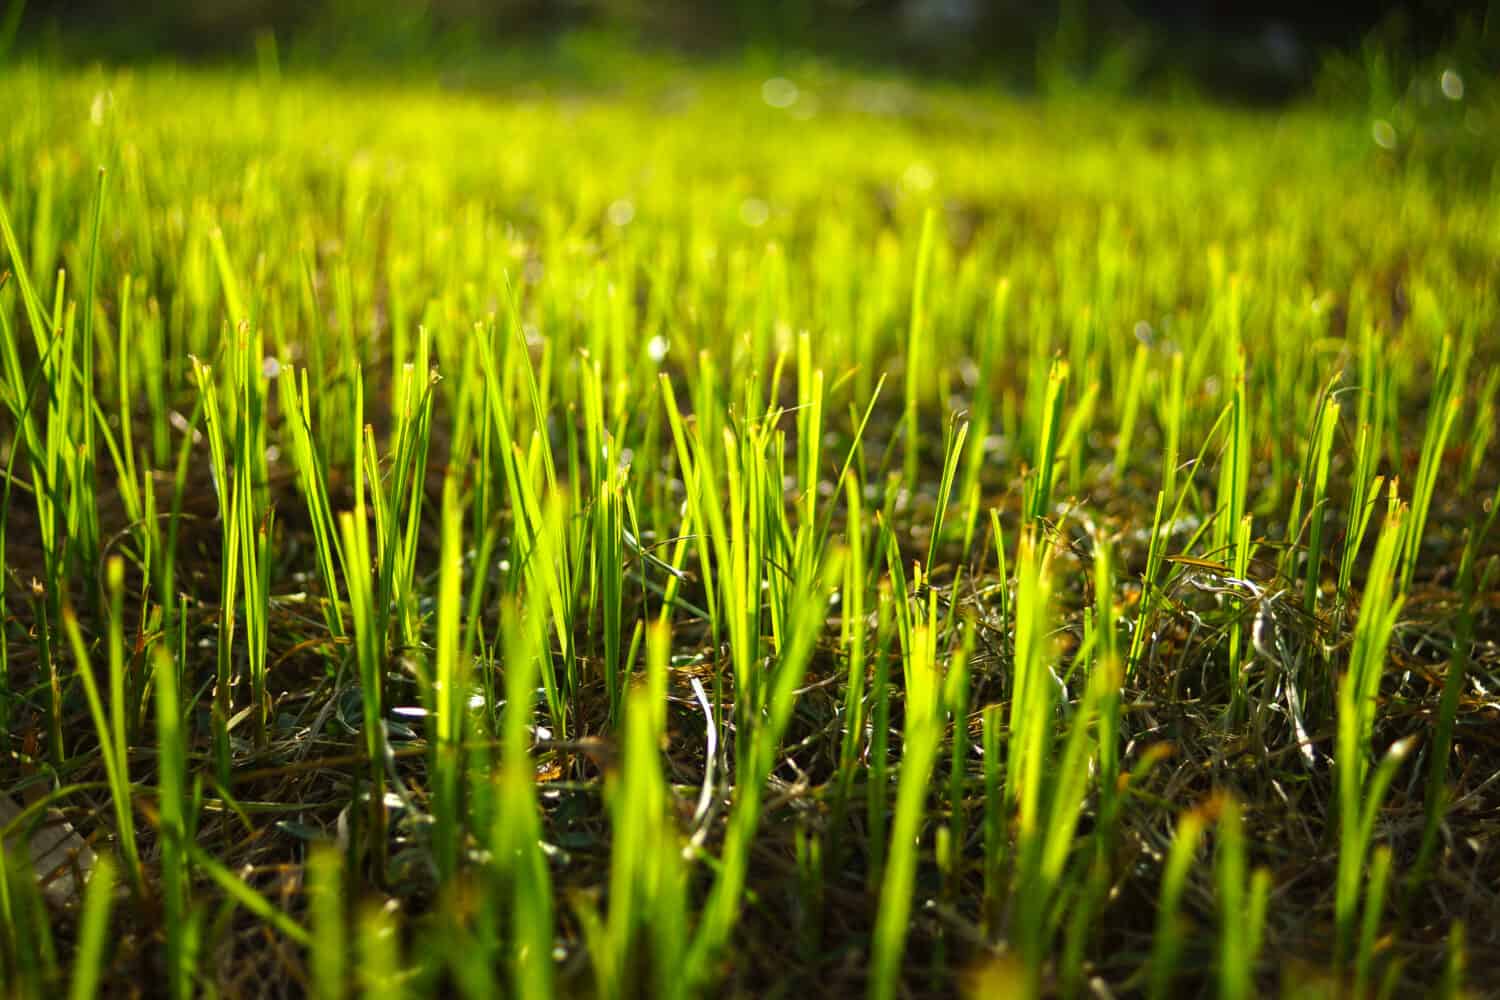 Applying lime in the best way for your lawn ensures healthy, thick grass.